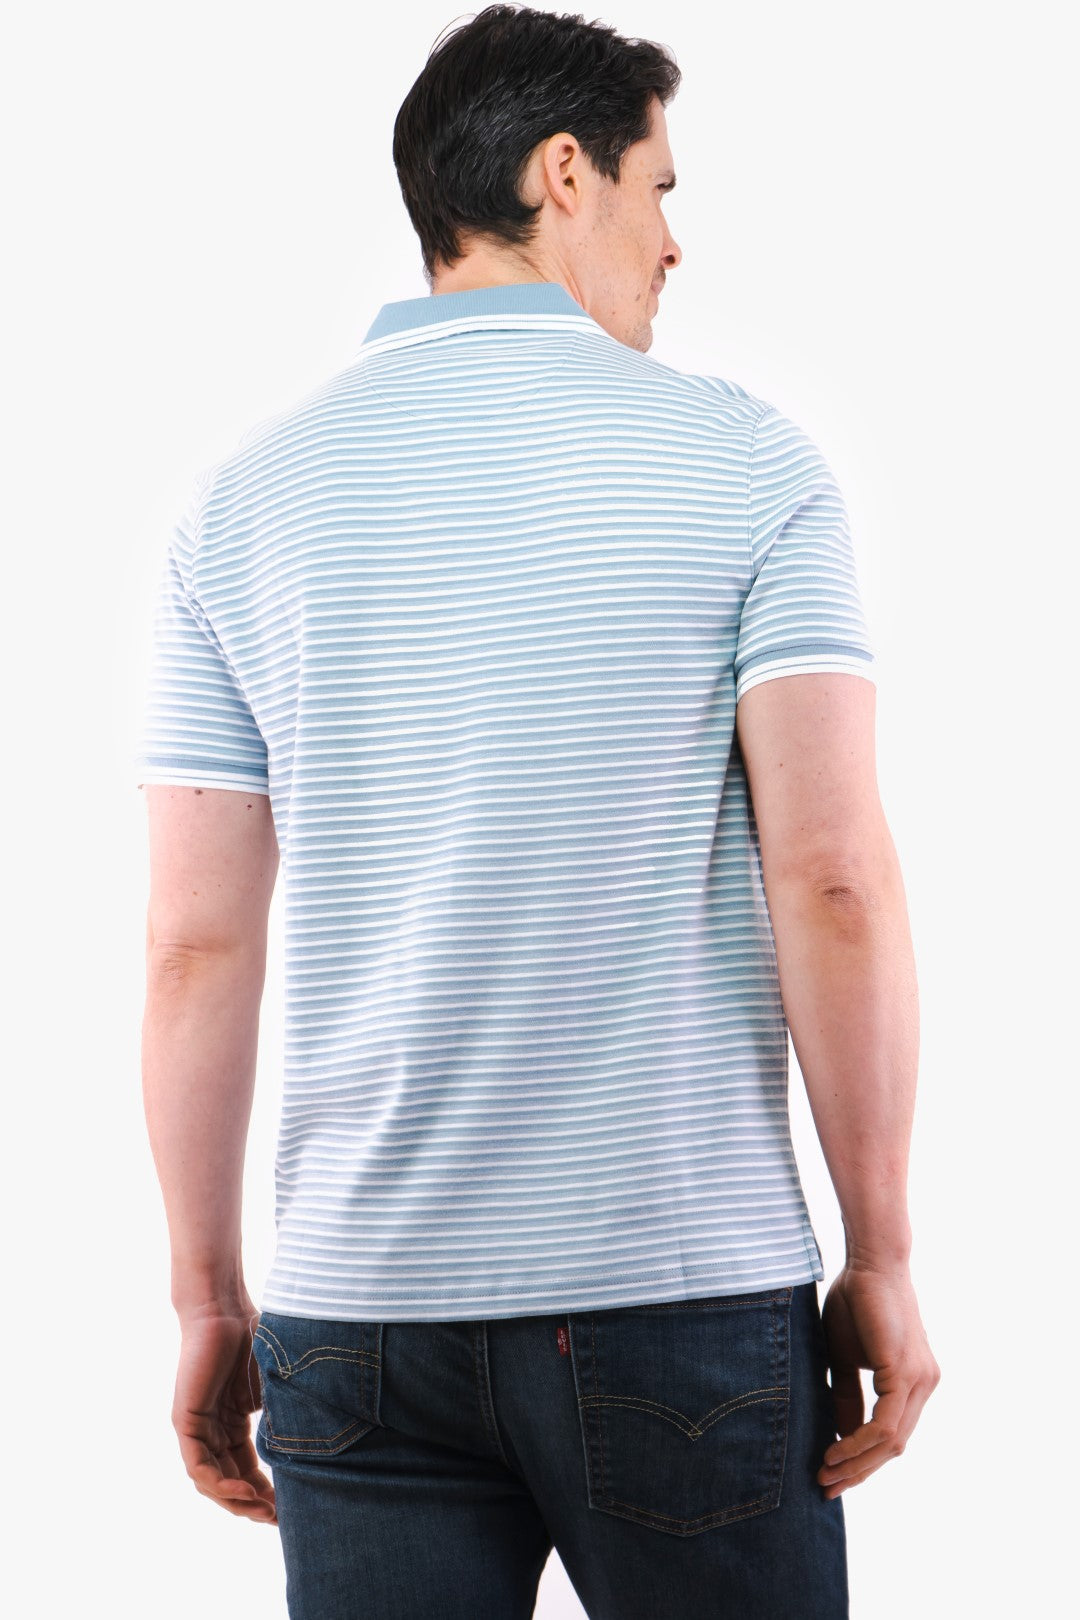 Michael Kors Lined Polo Shirt in Blue/White color